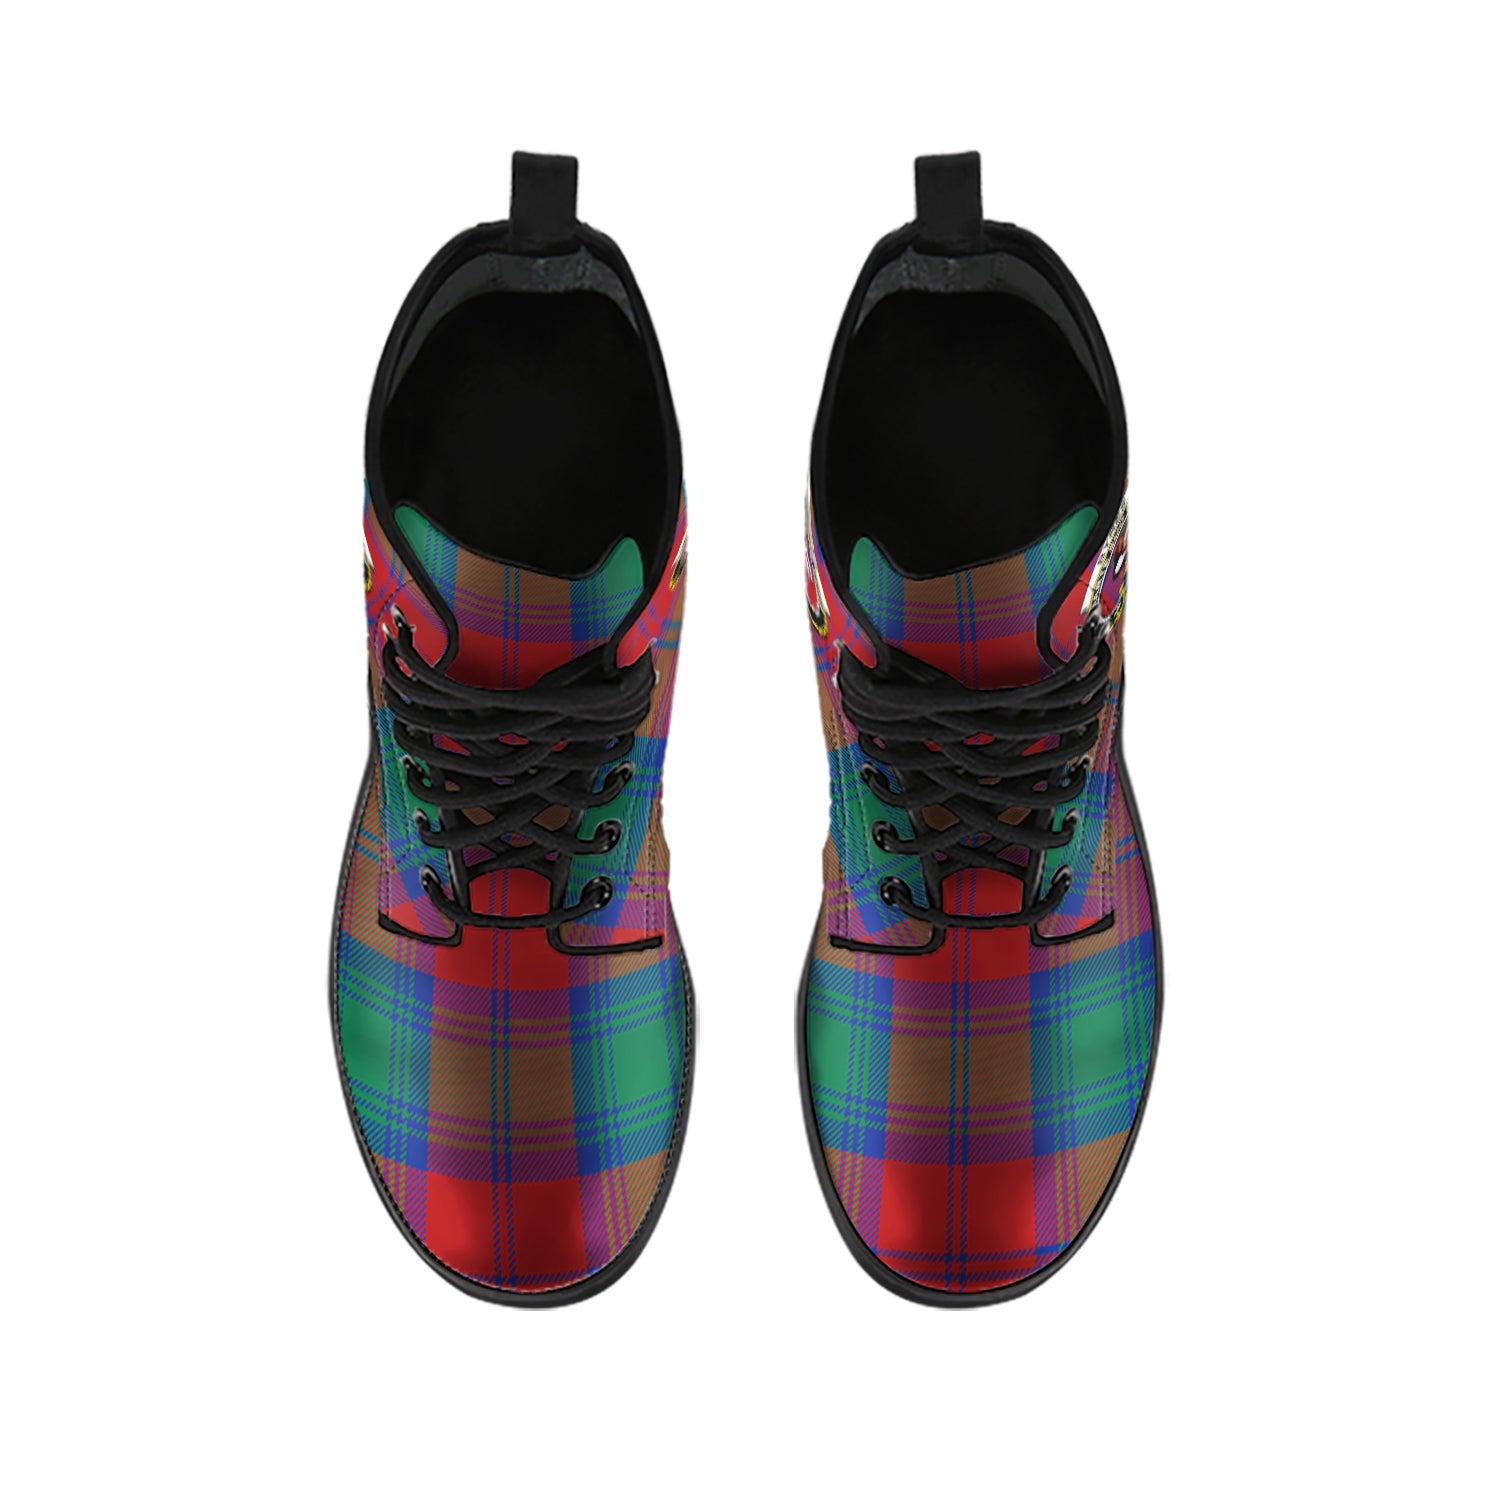 Byres (Byses) Tartan Leather Boots with Family Crest